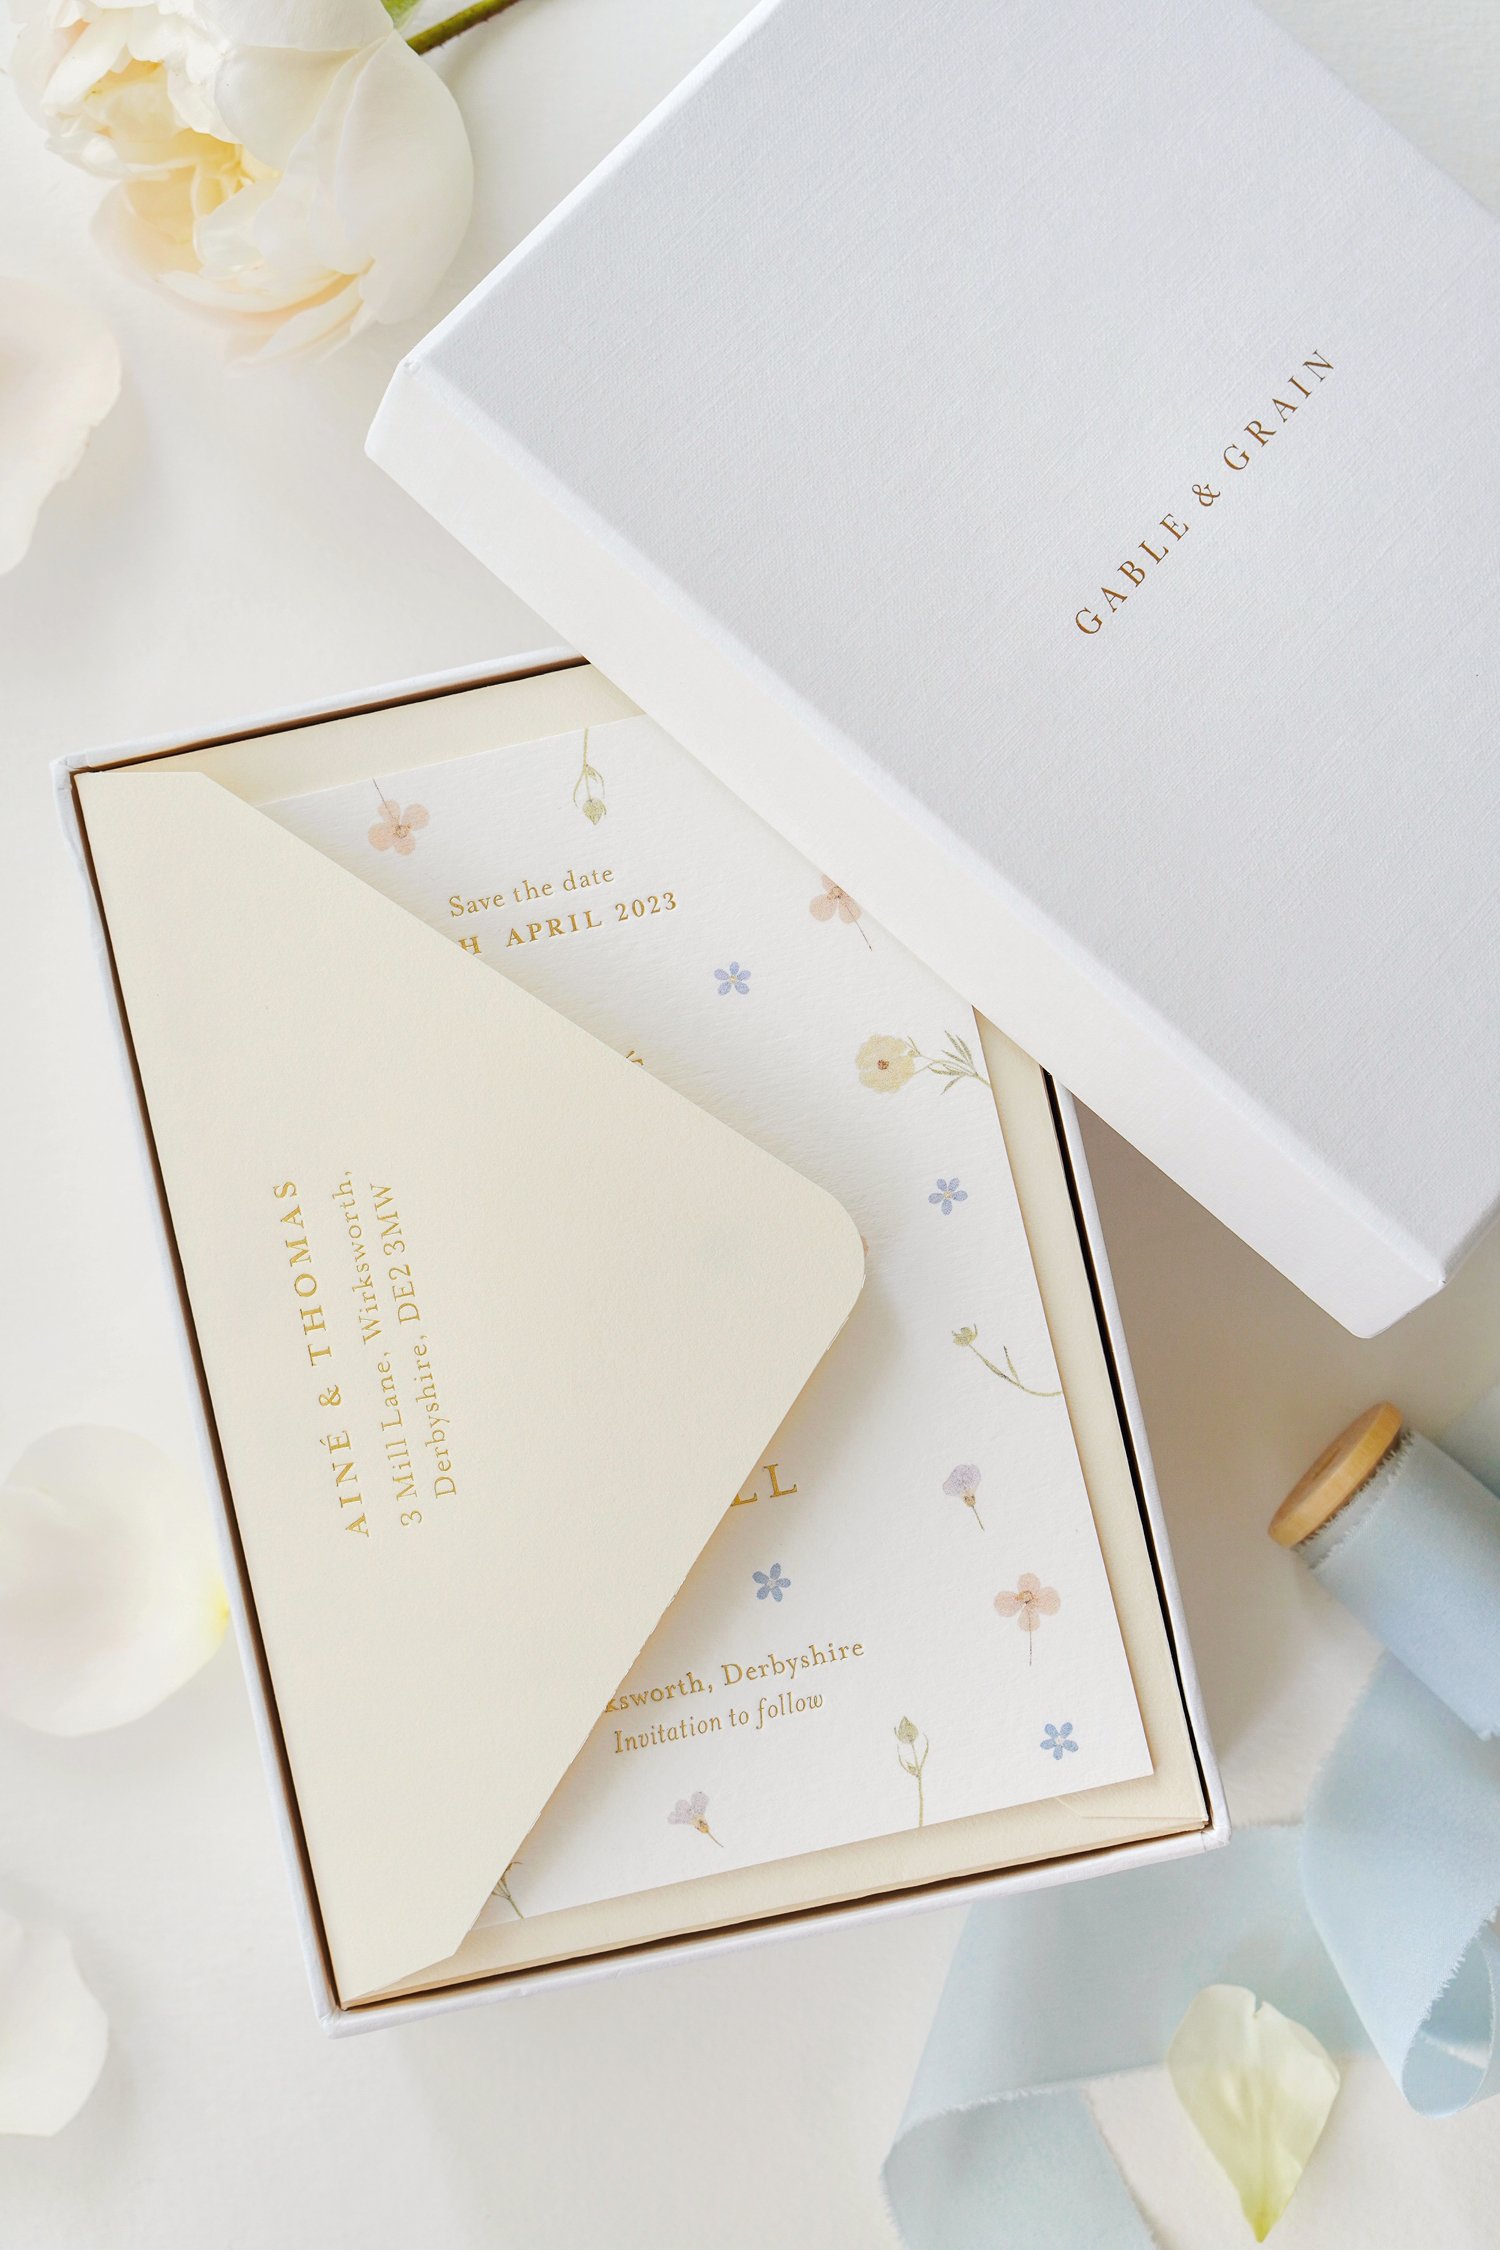 Luxury stationery packaging